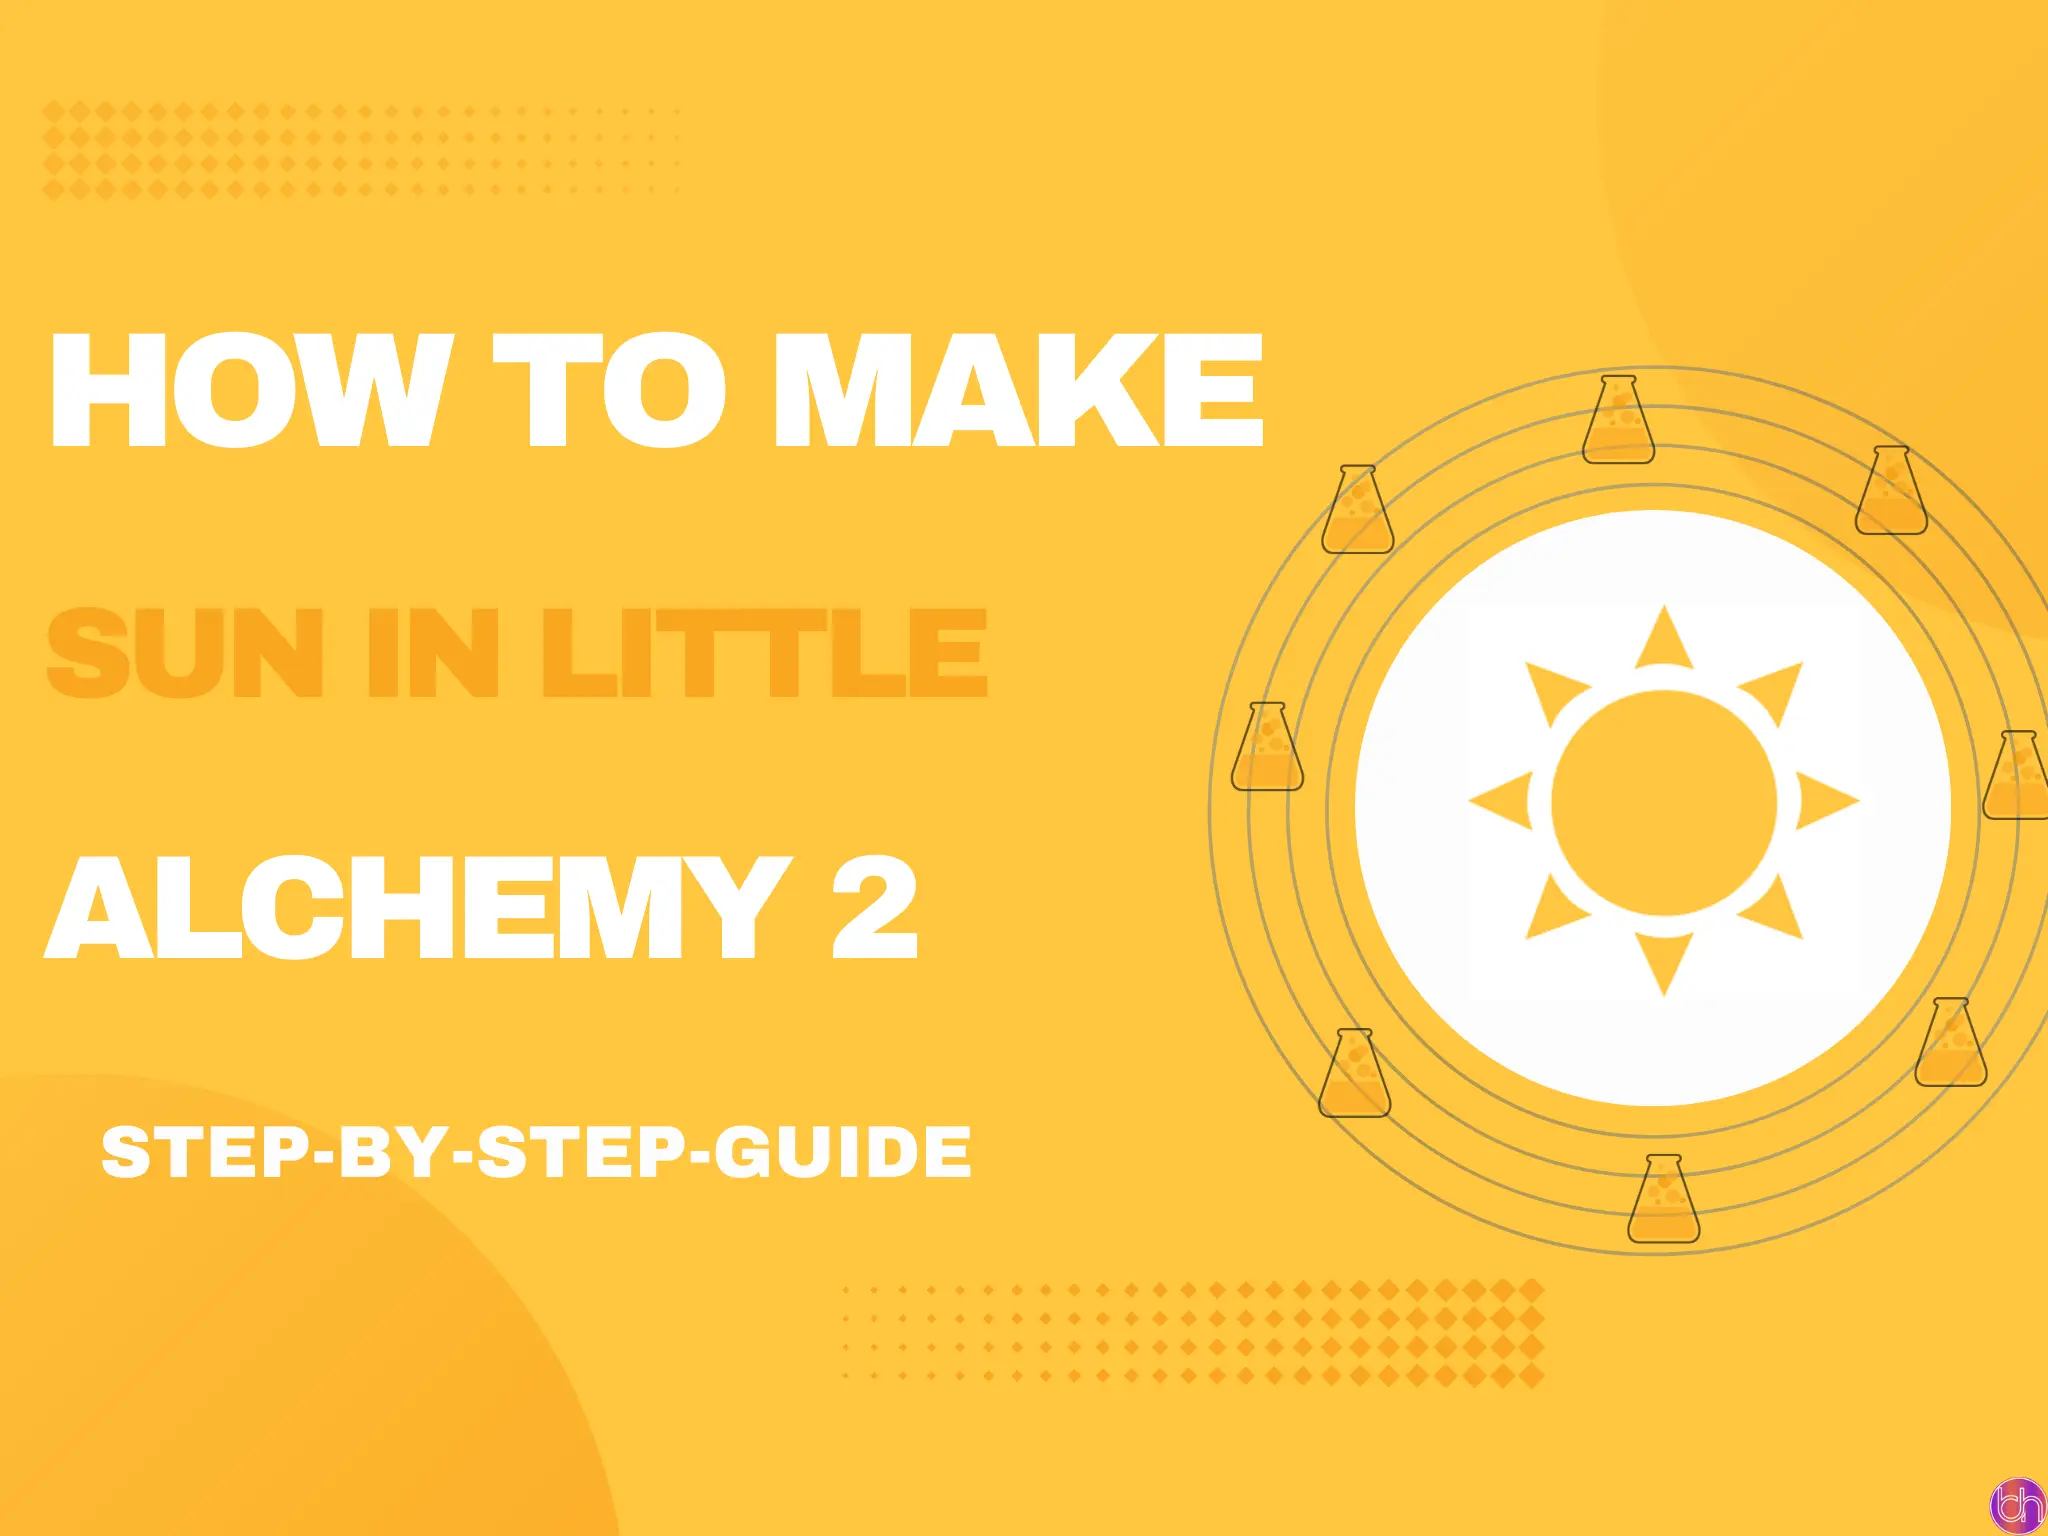 How to make Sun in little alchemy 2